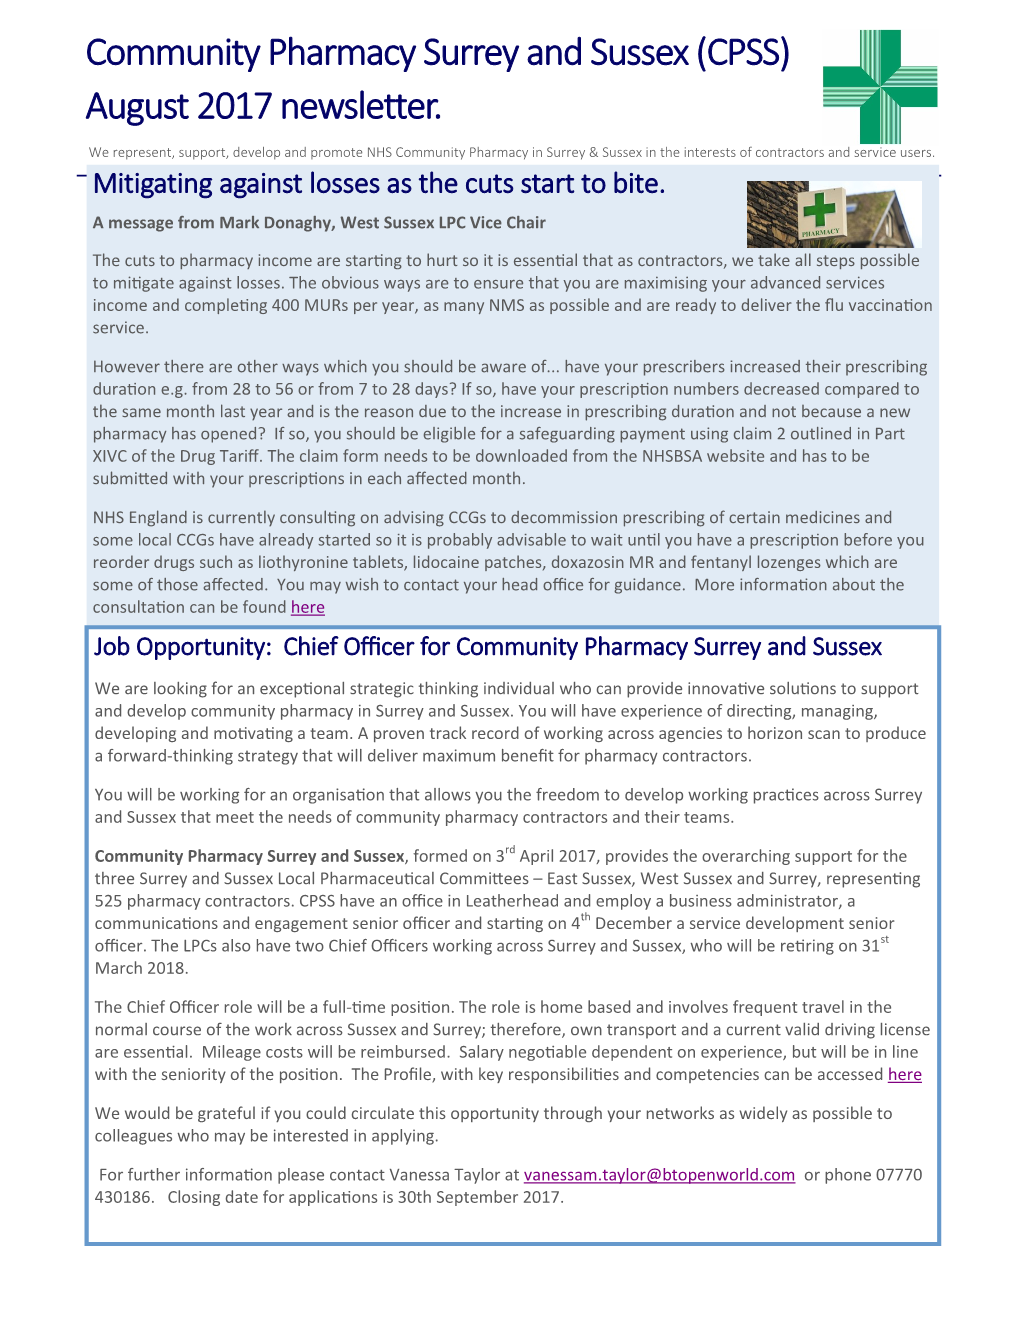 Community Pharmacy Surrey and Sussex (CPSS) August 2017 Newsletter